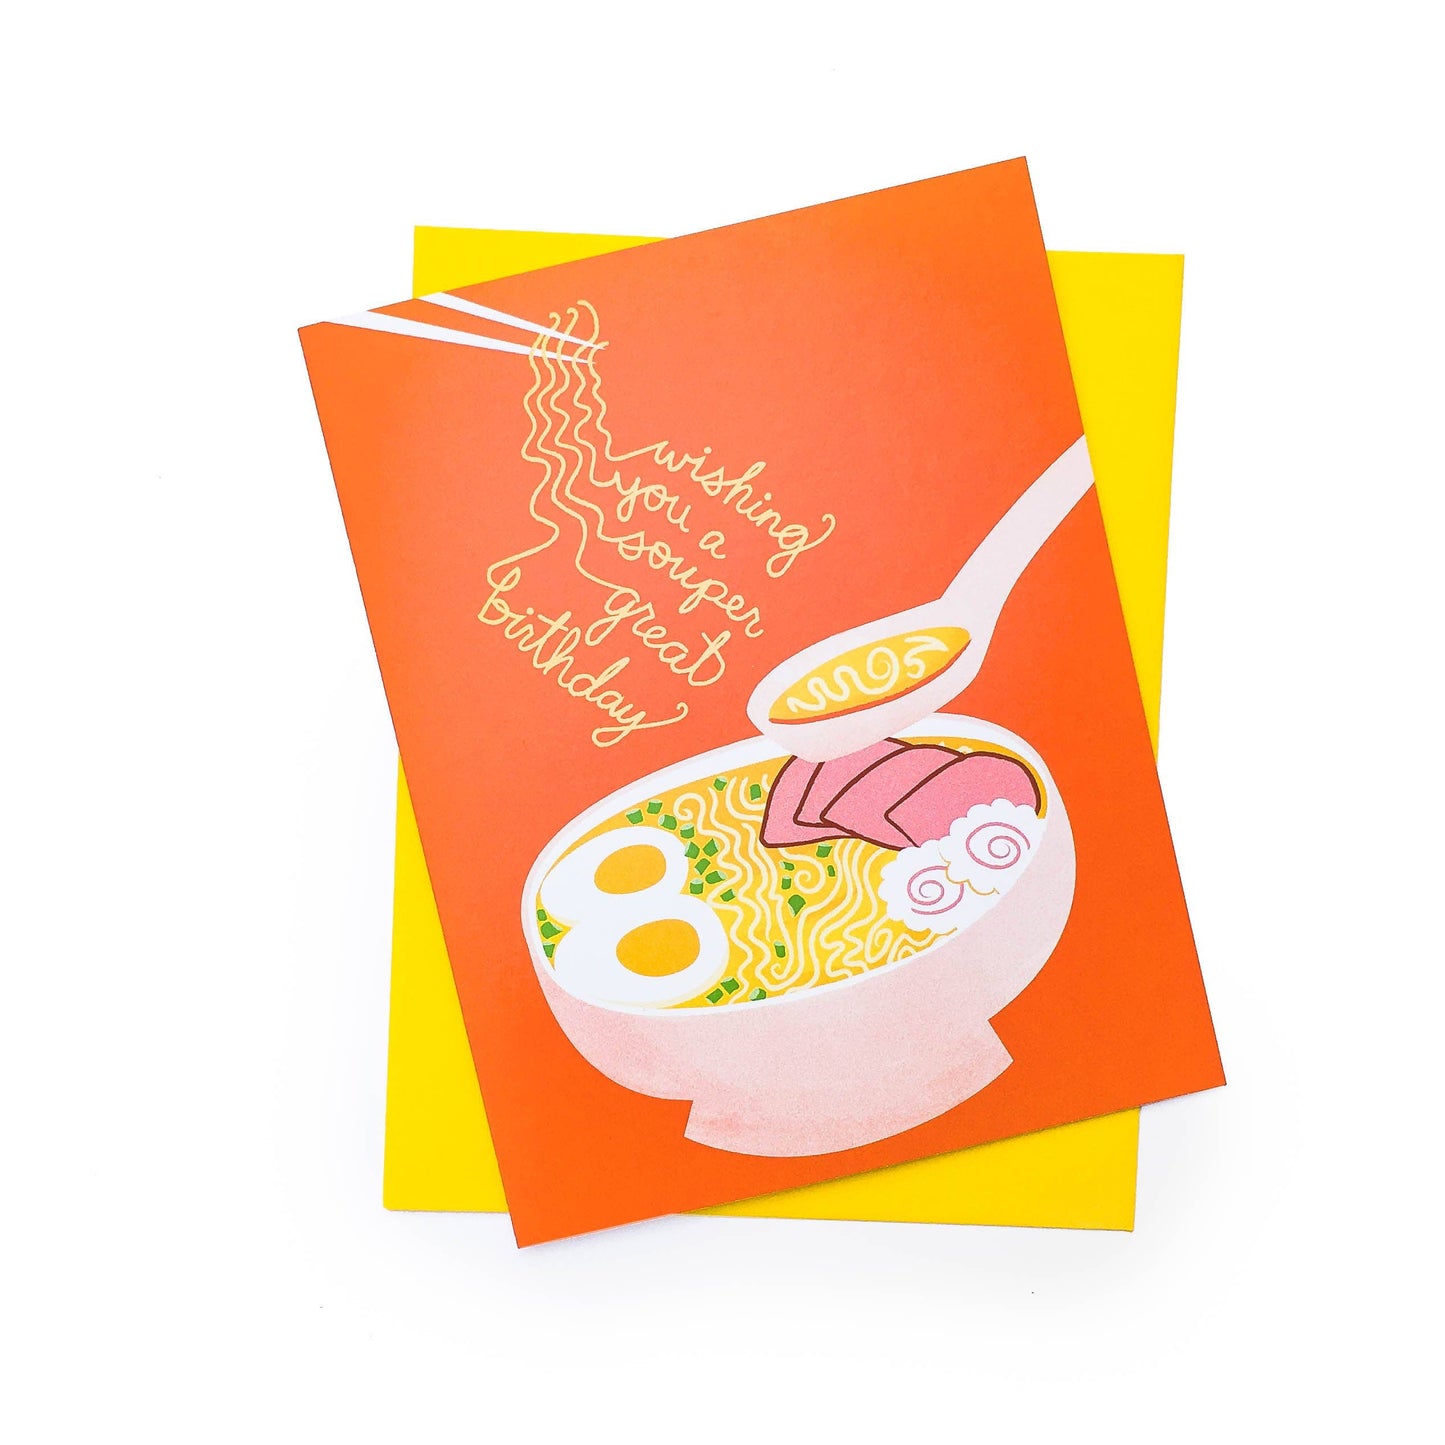 red birthday greeting card with a ramen soup bowl on it and reads "Wishing you a souper great birthday"